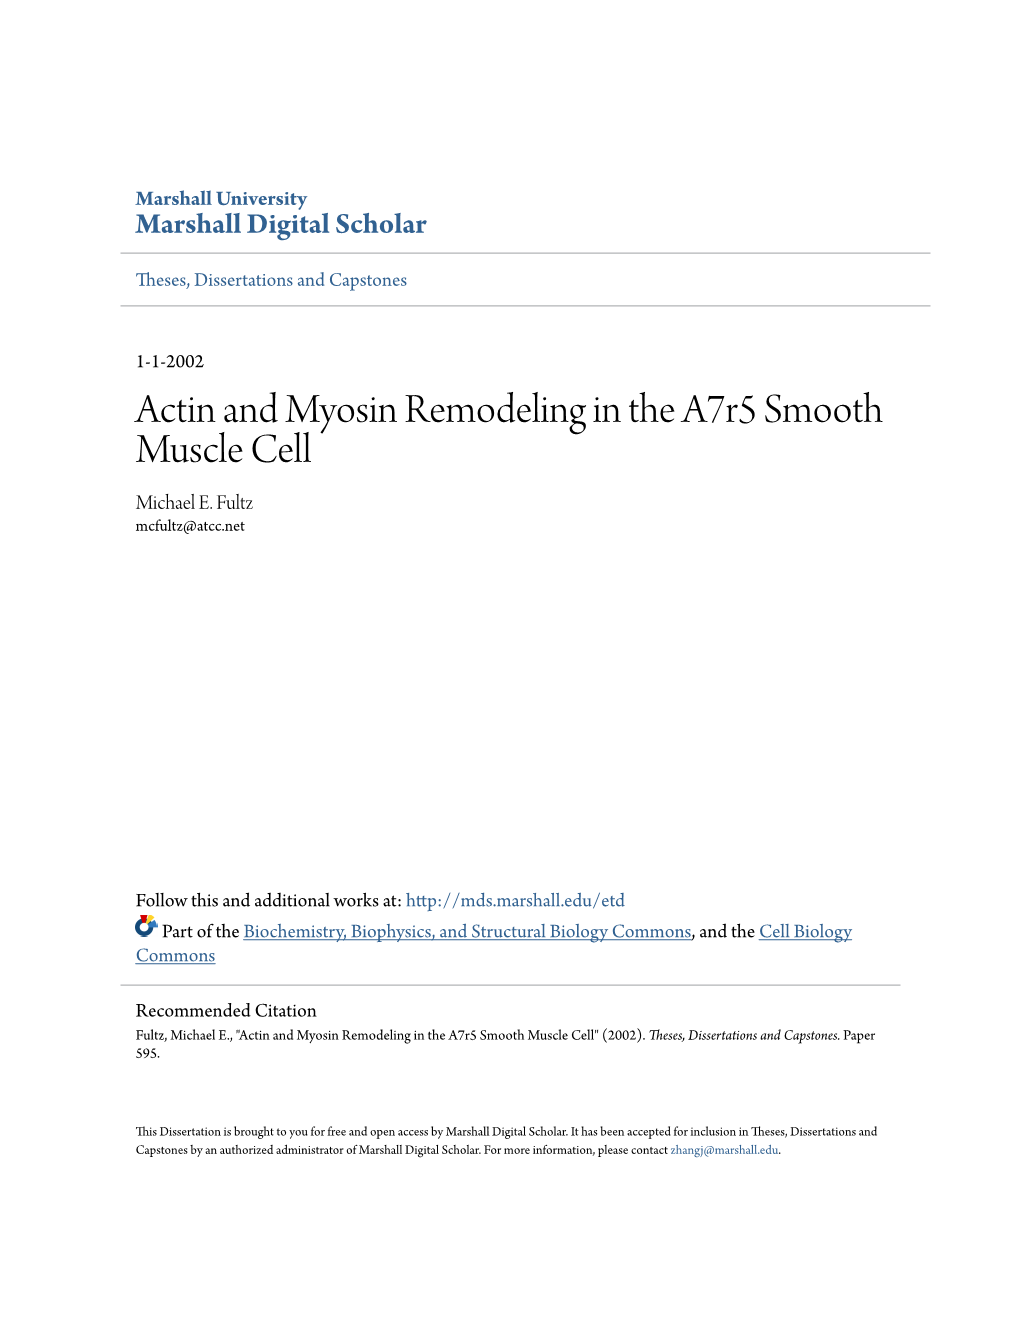 Actin and Myosin Remodeling in the A7r5 Smooth Muscle Cell Michael E